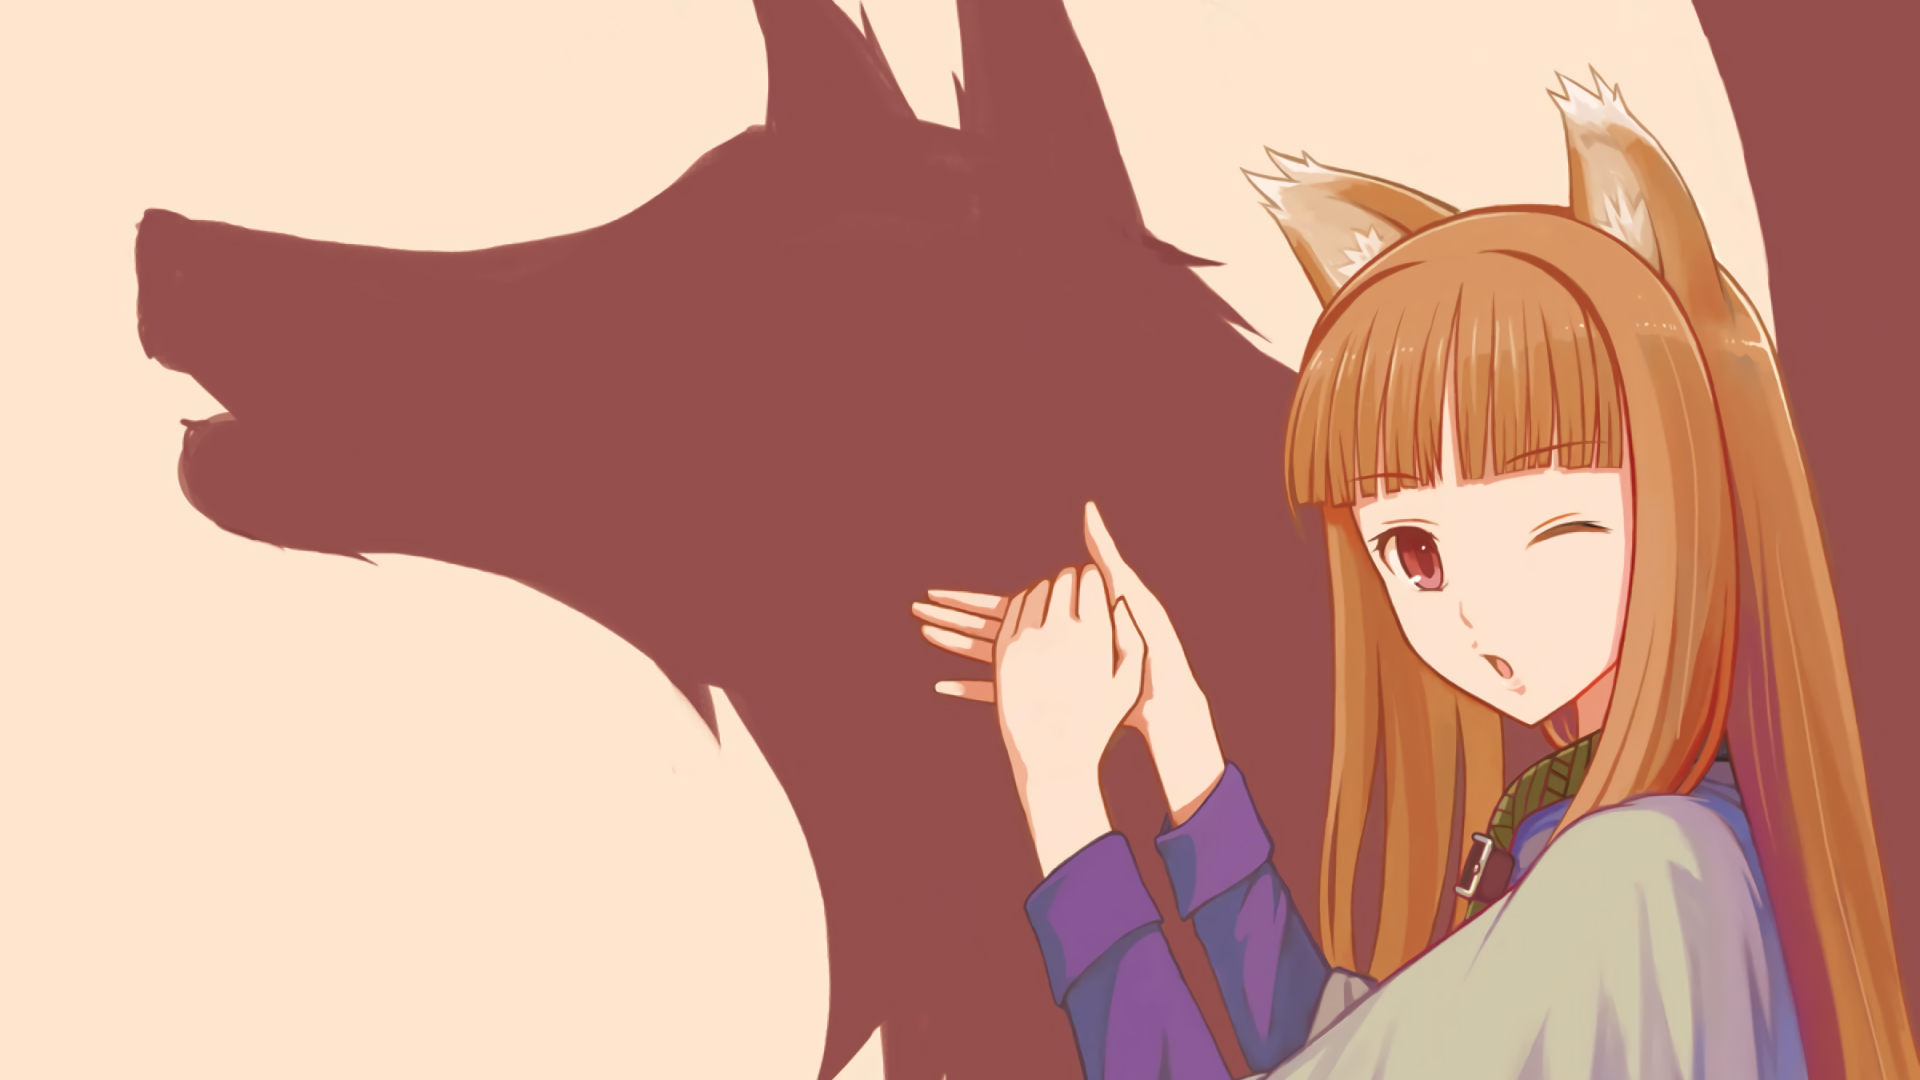 Spice and Wolf Art by 夕霧